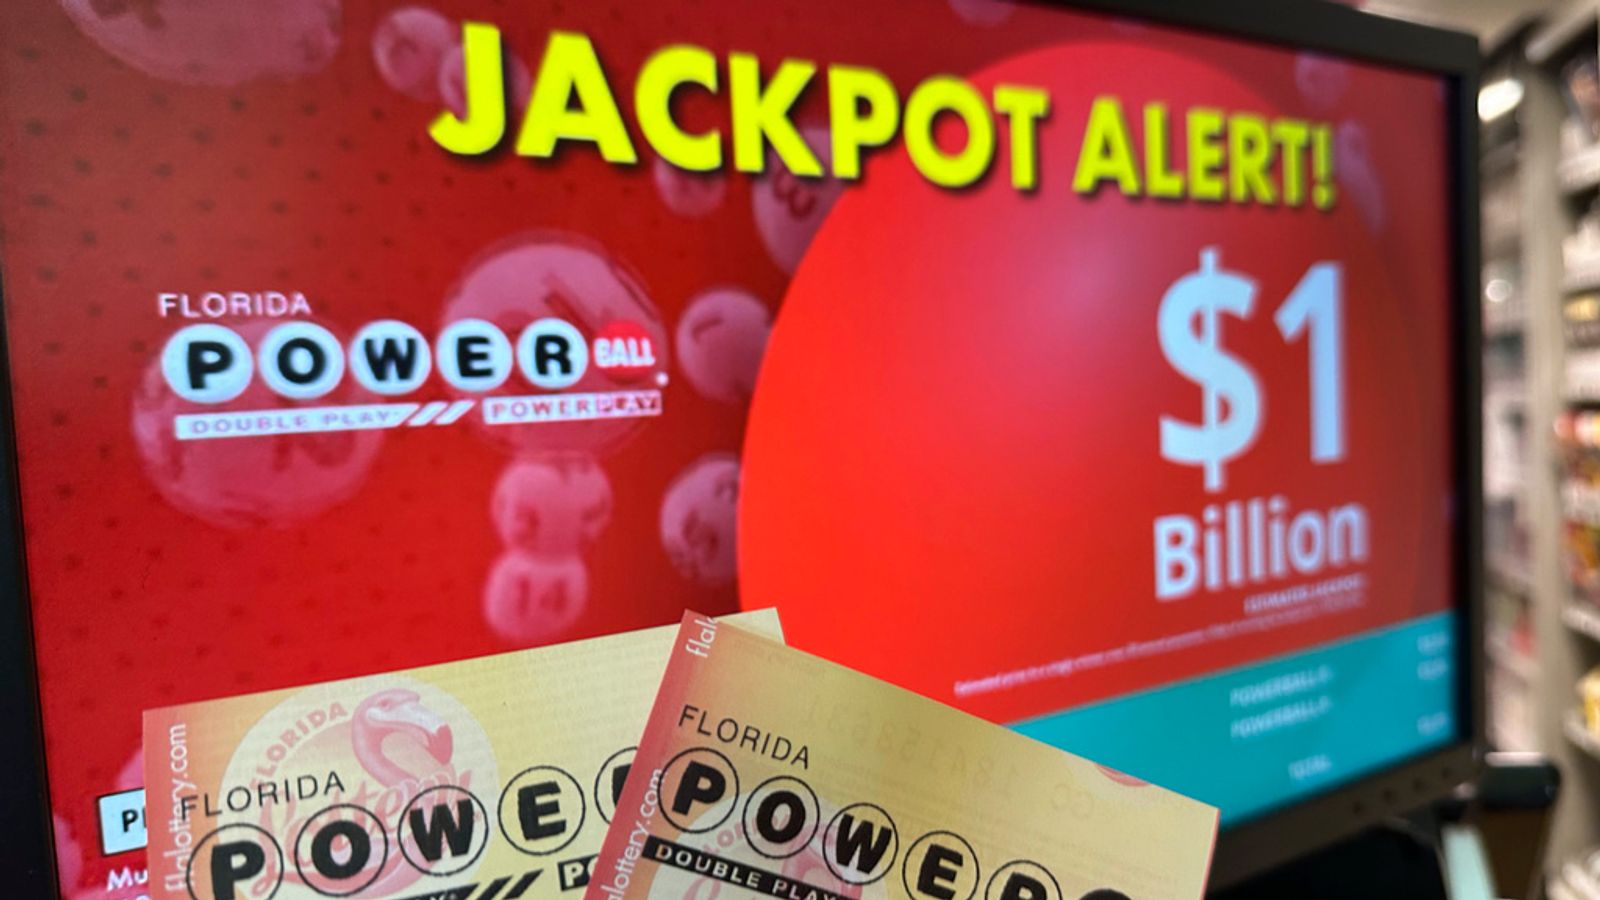 US ticketholder scoops .3bn Powerball jackpot - here's what they could buy with all that money